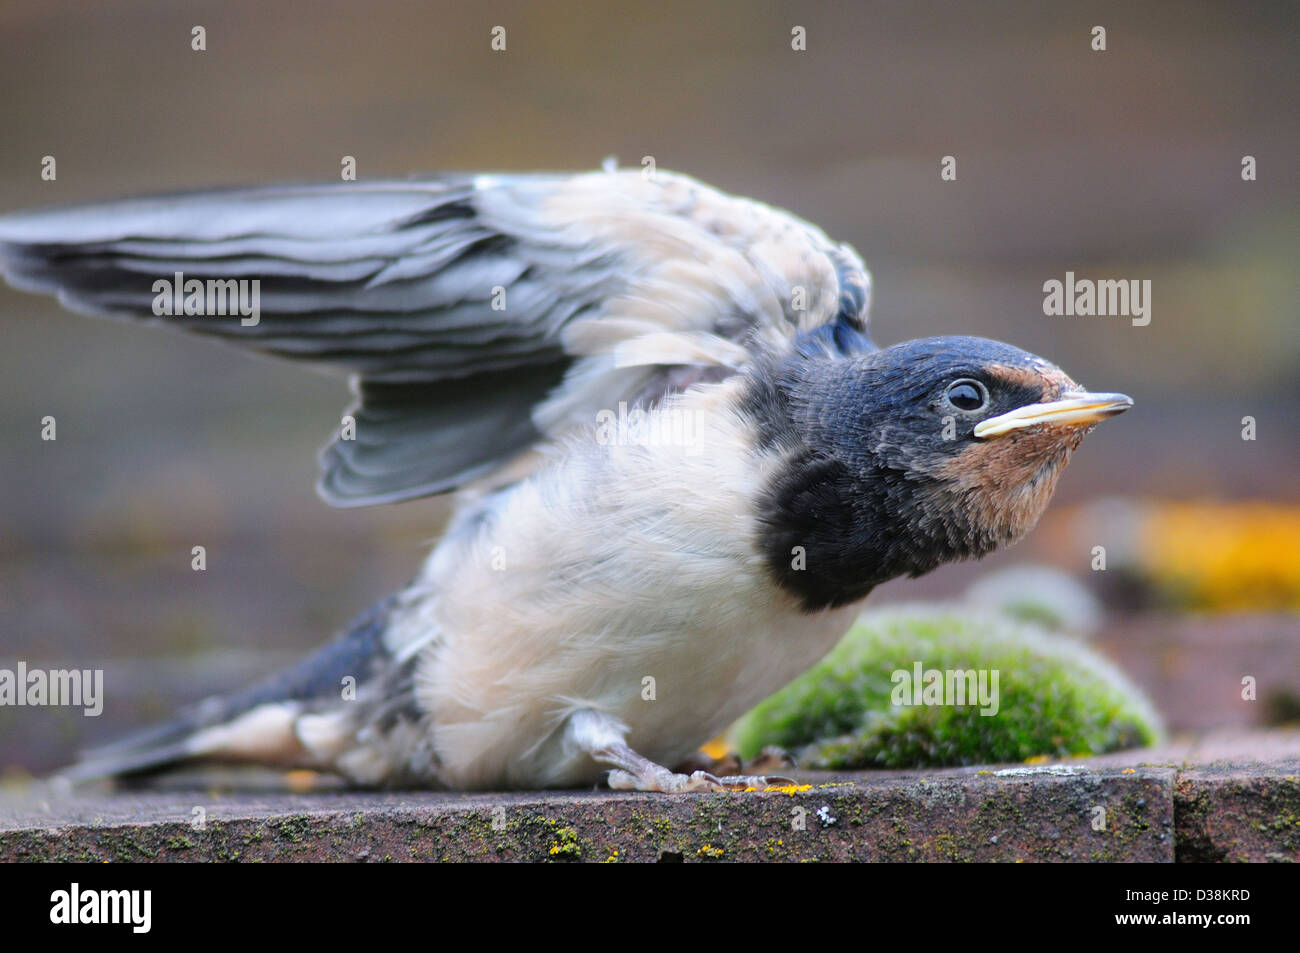 A swallow fledgling Stock Photo